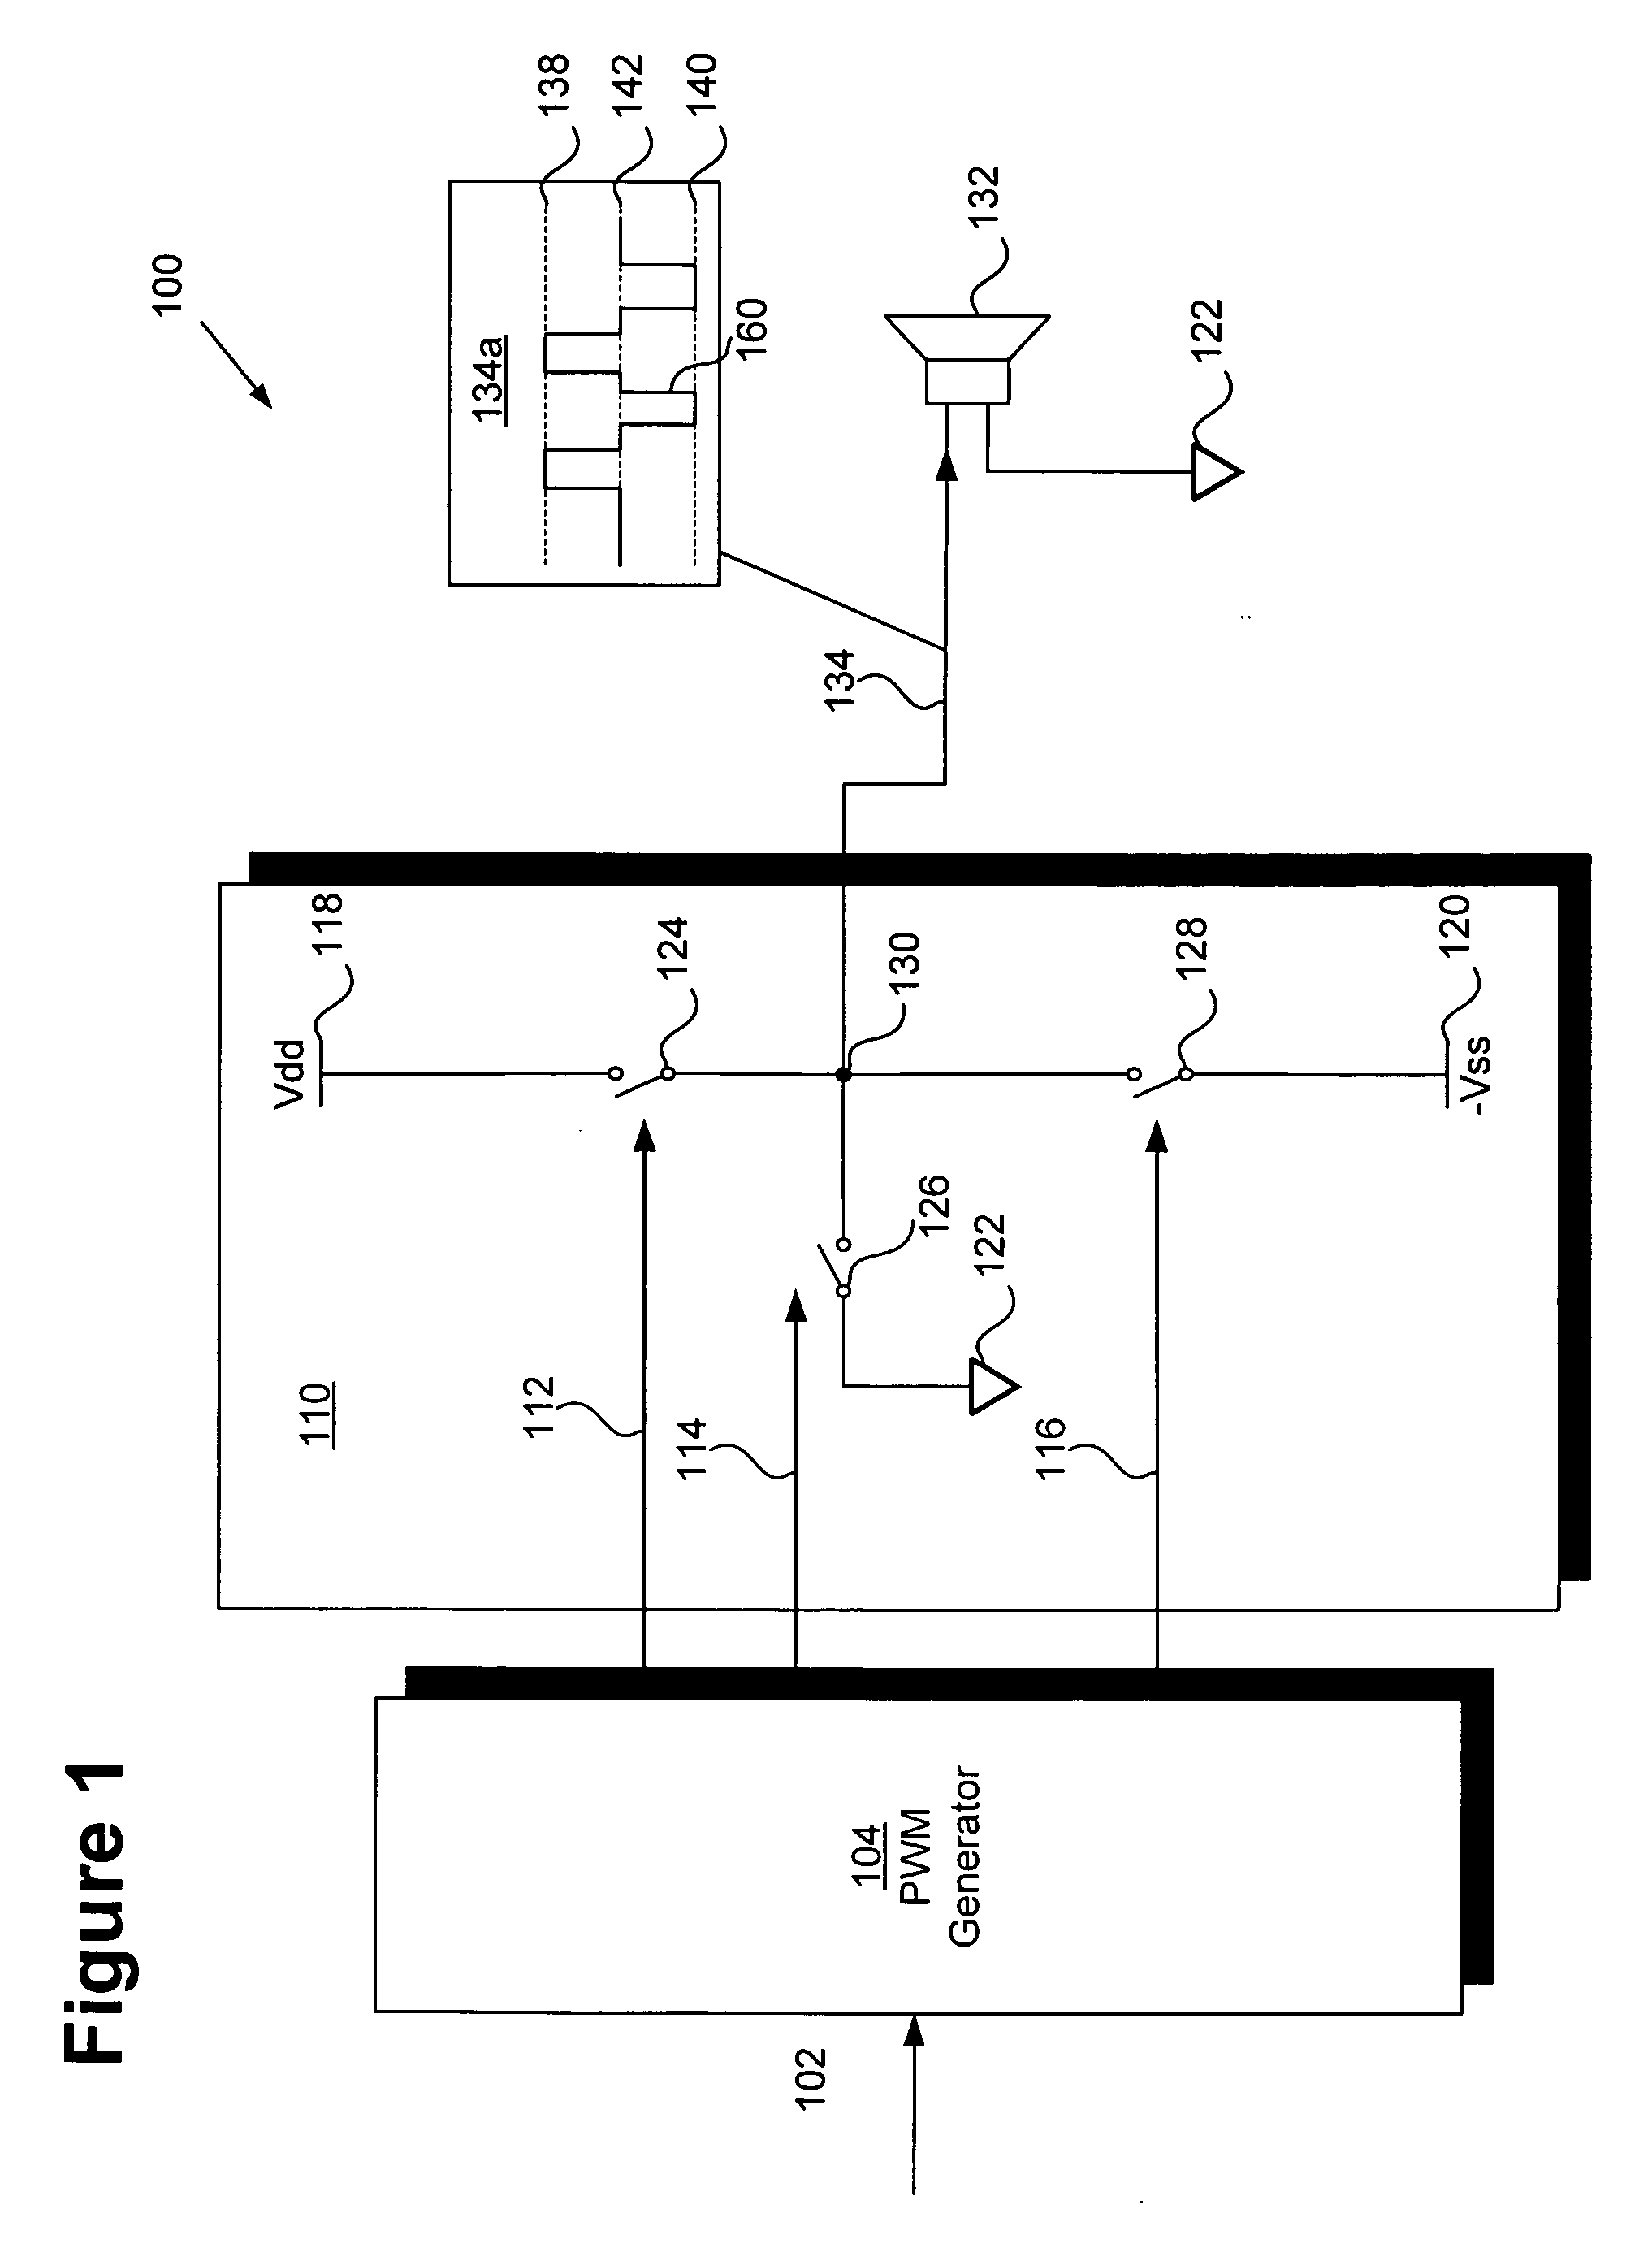 Ground-referenced common-mode amplifier circuit and related method